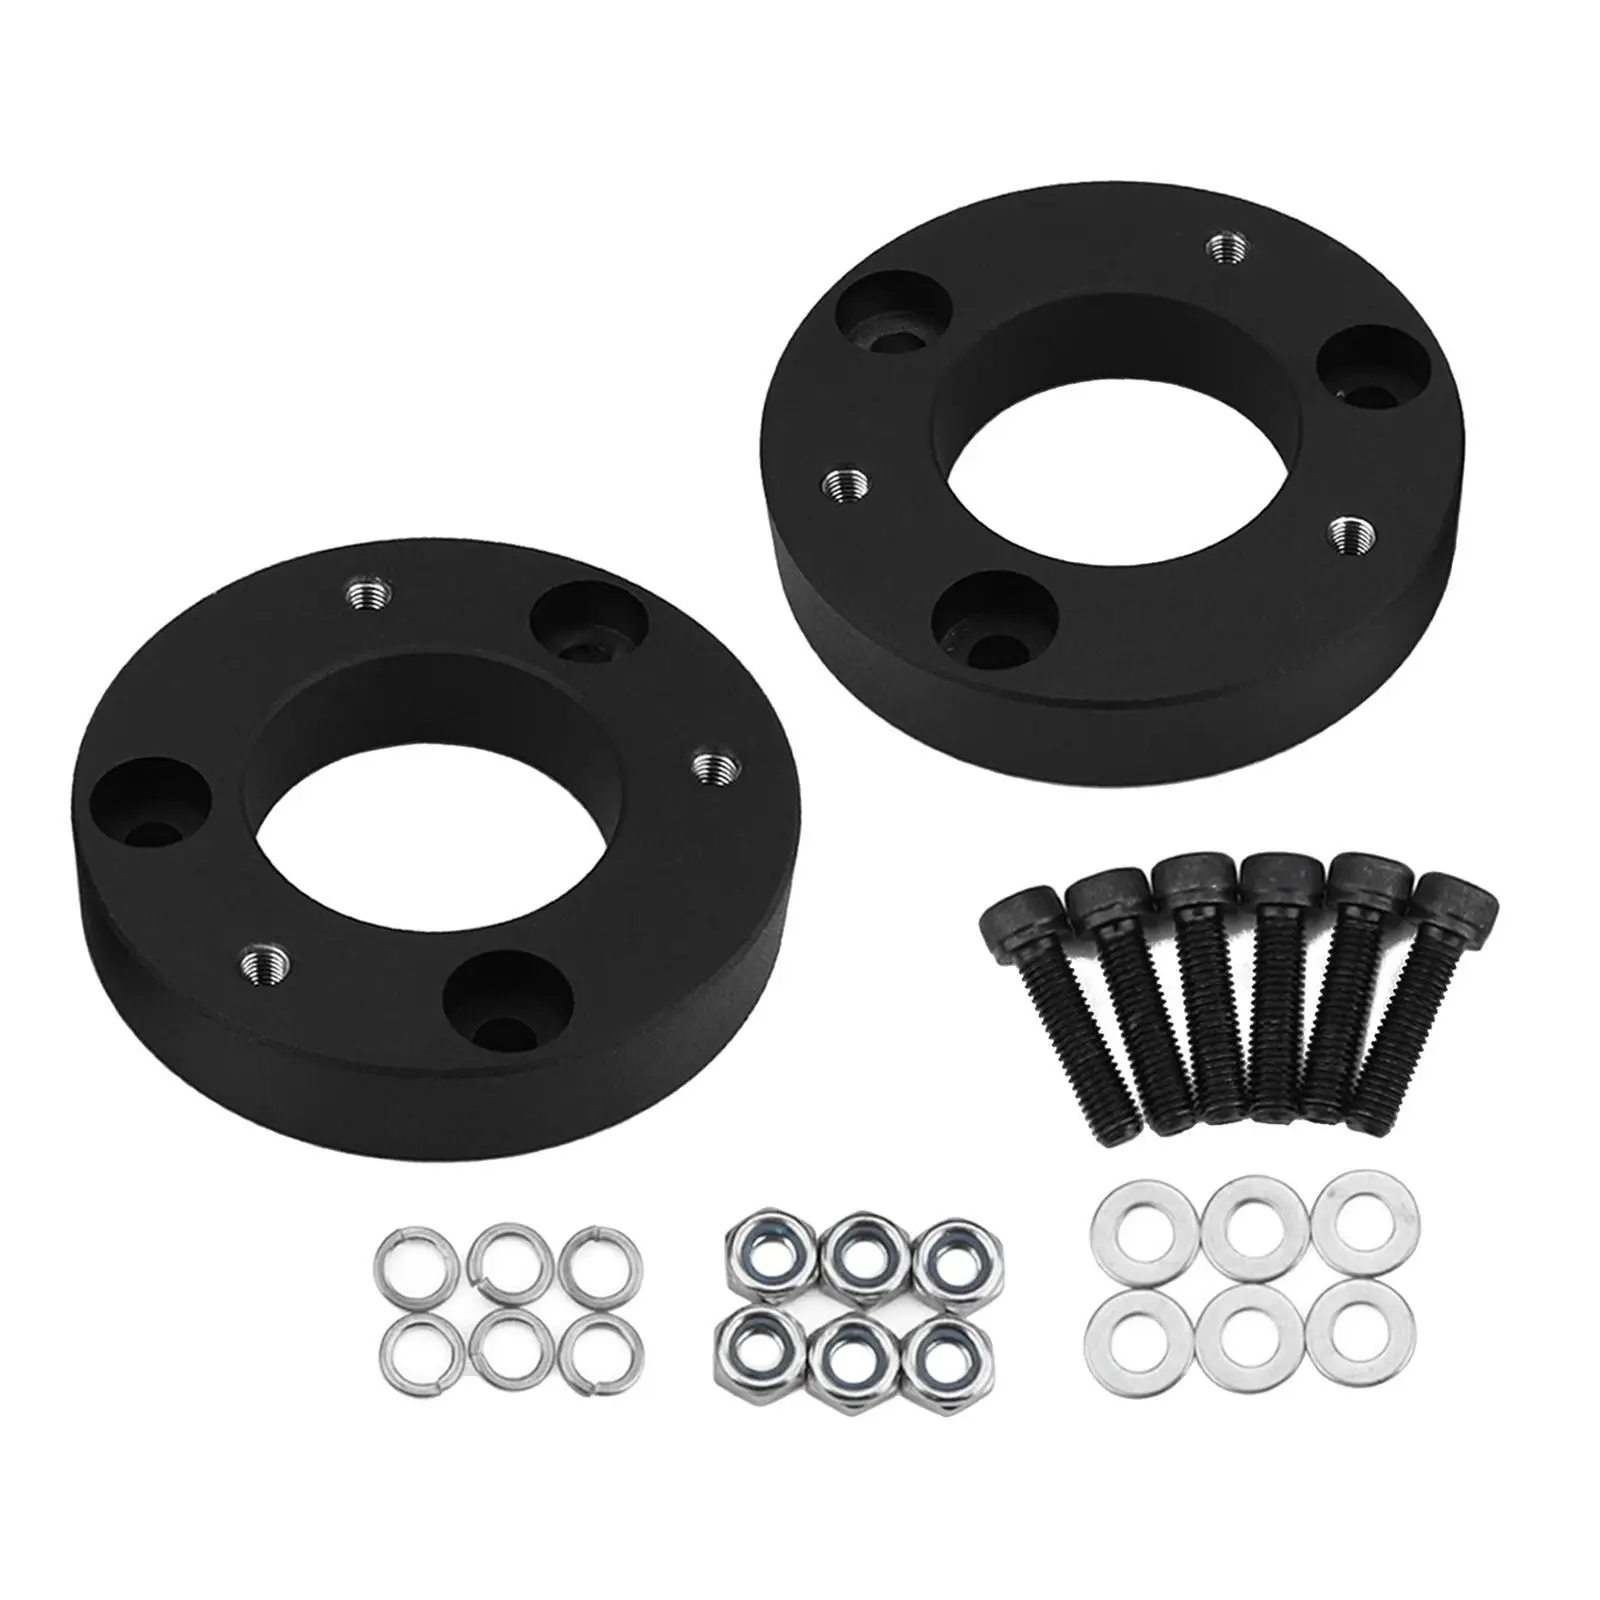 Car Front Leveling Lift Kit Spacers Raise Fits Compatible with Ford F150 4TD 2TD 2004-2019 Black